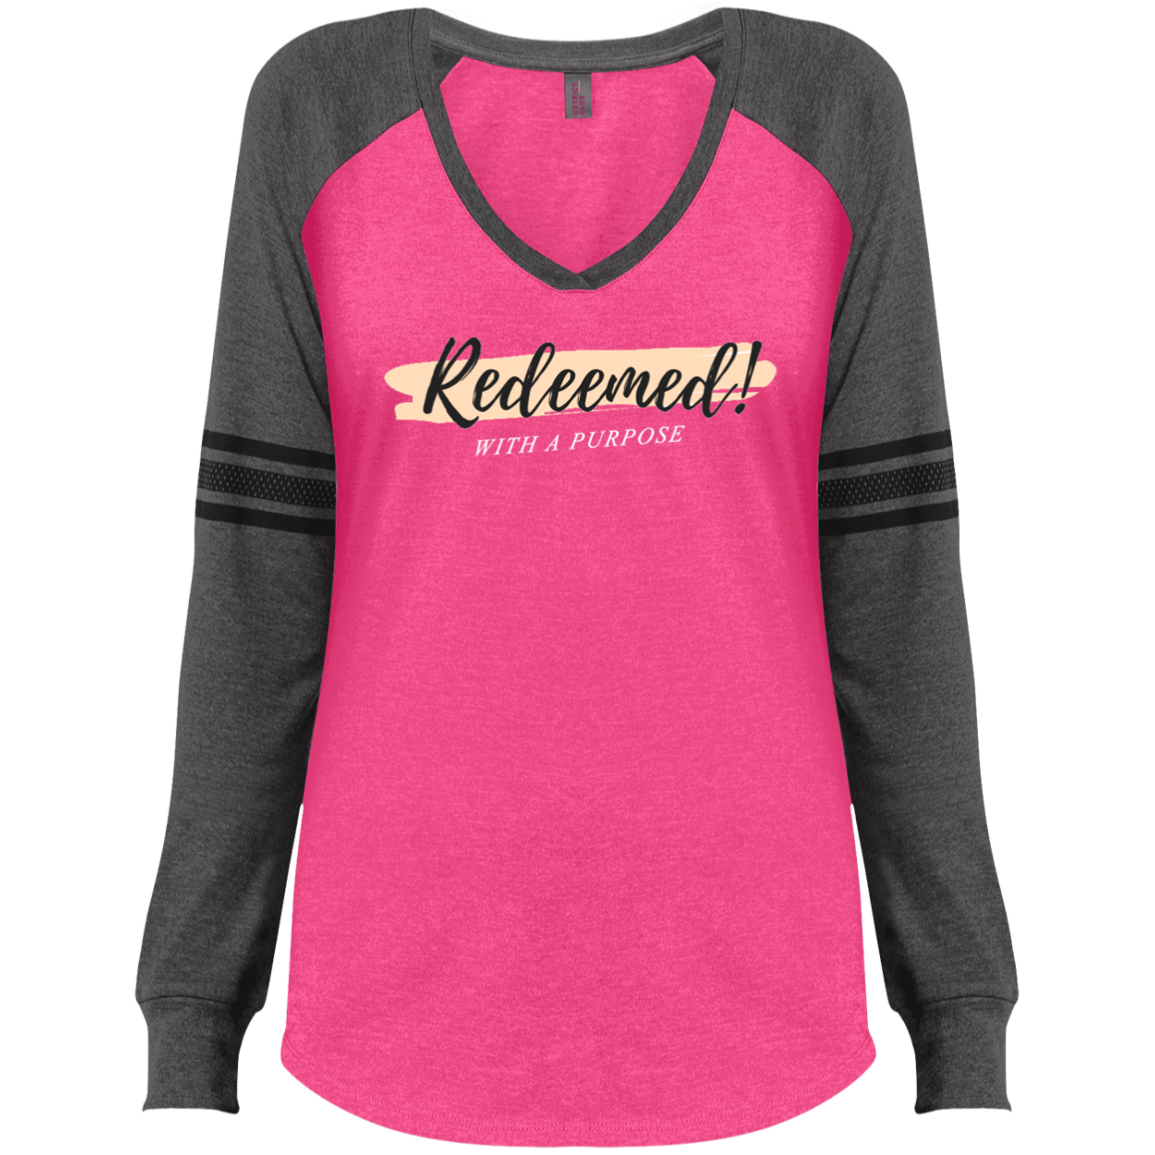 Redeemed! With A Purpose T-Shirt